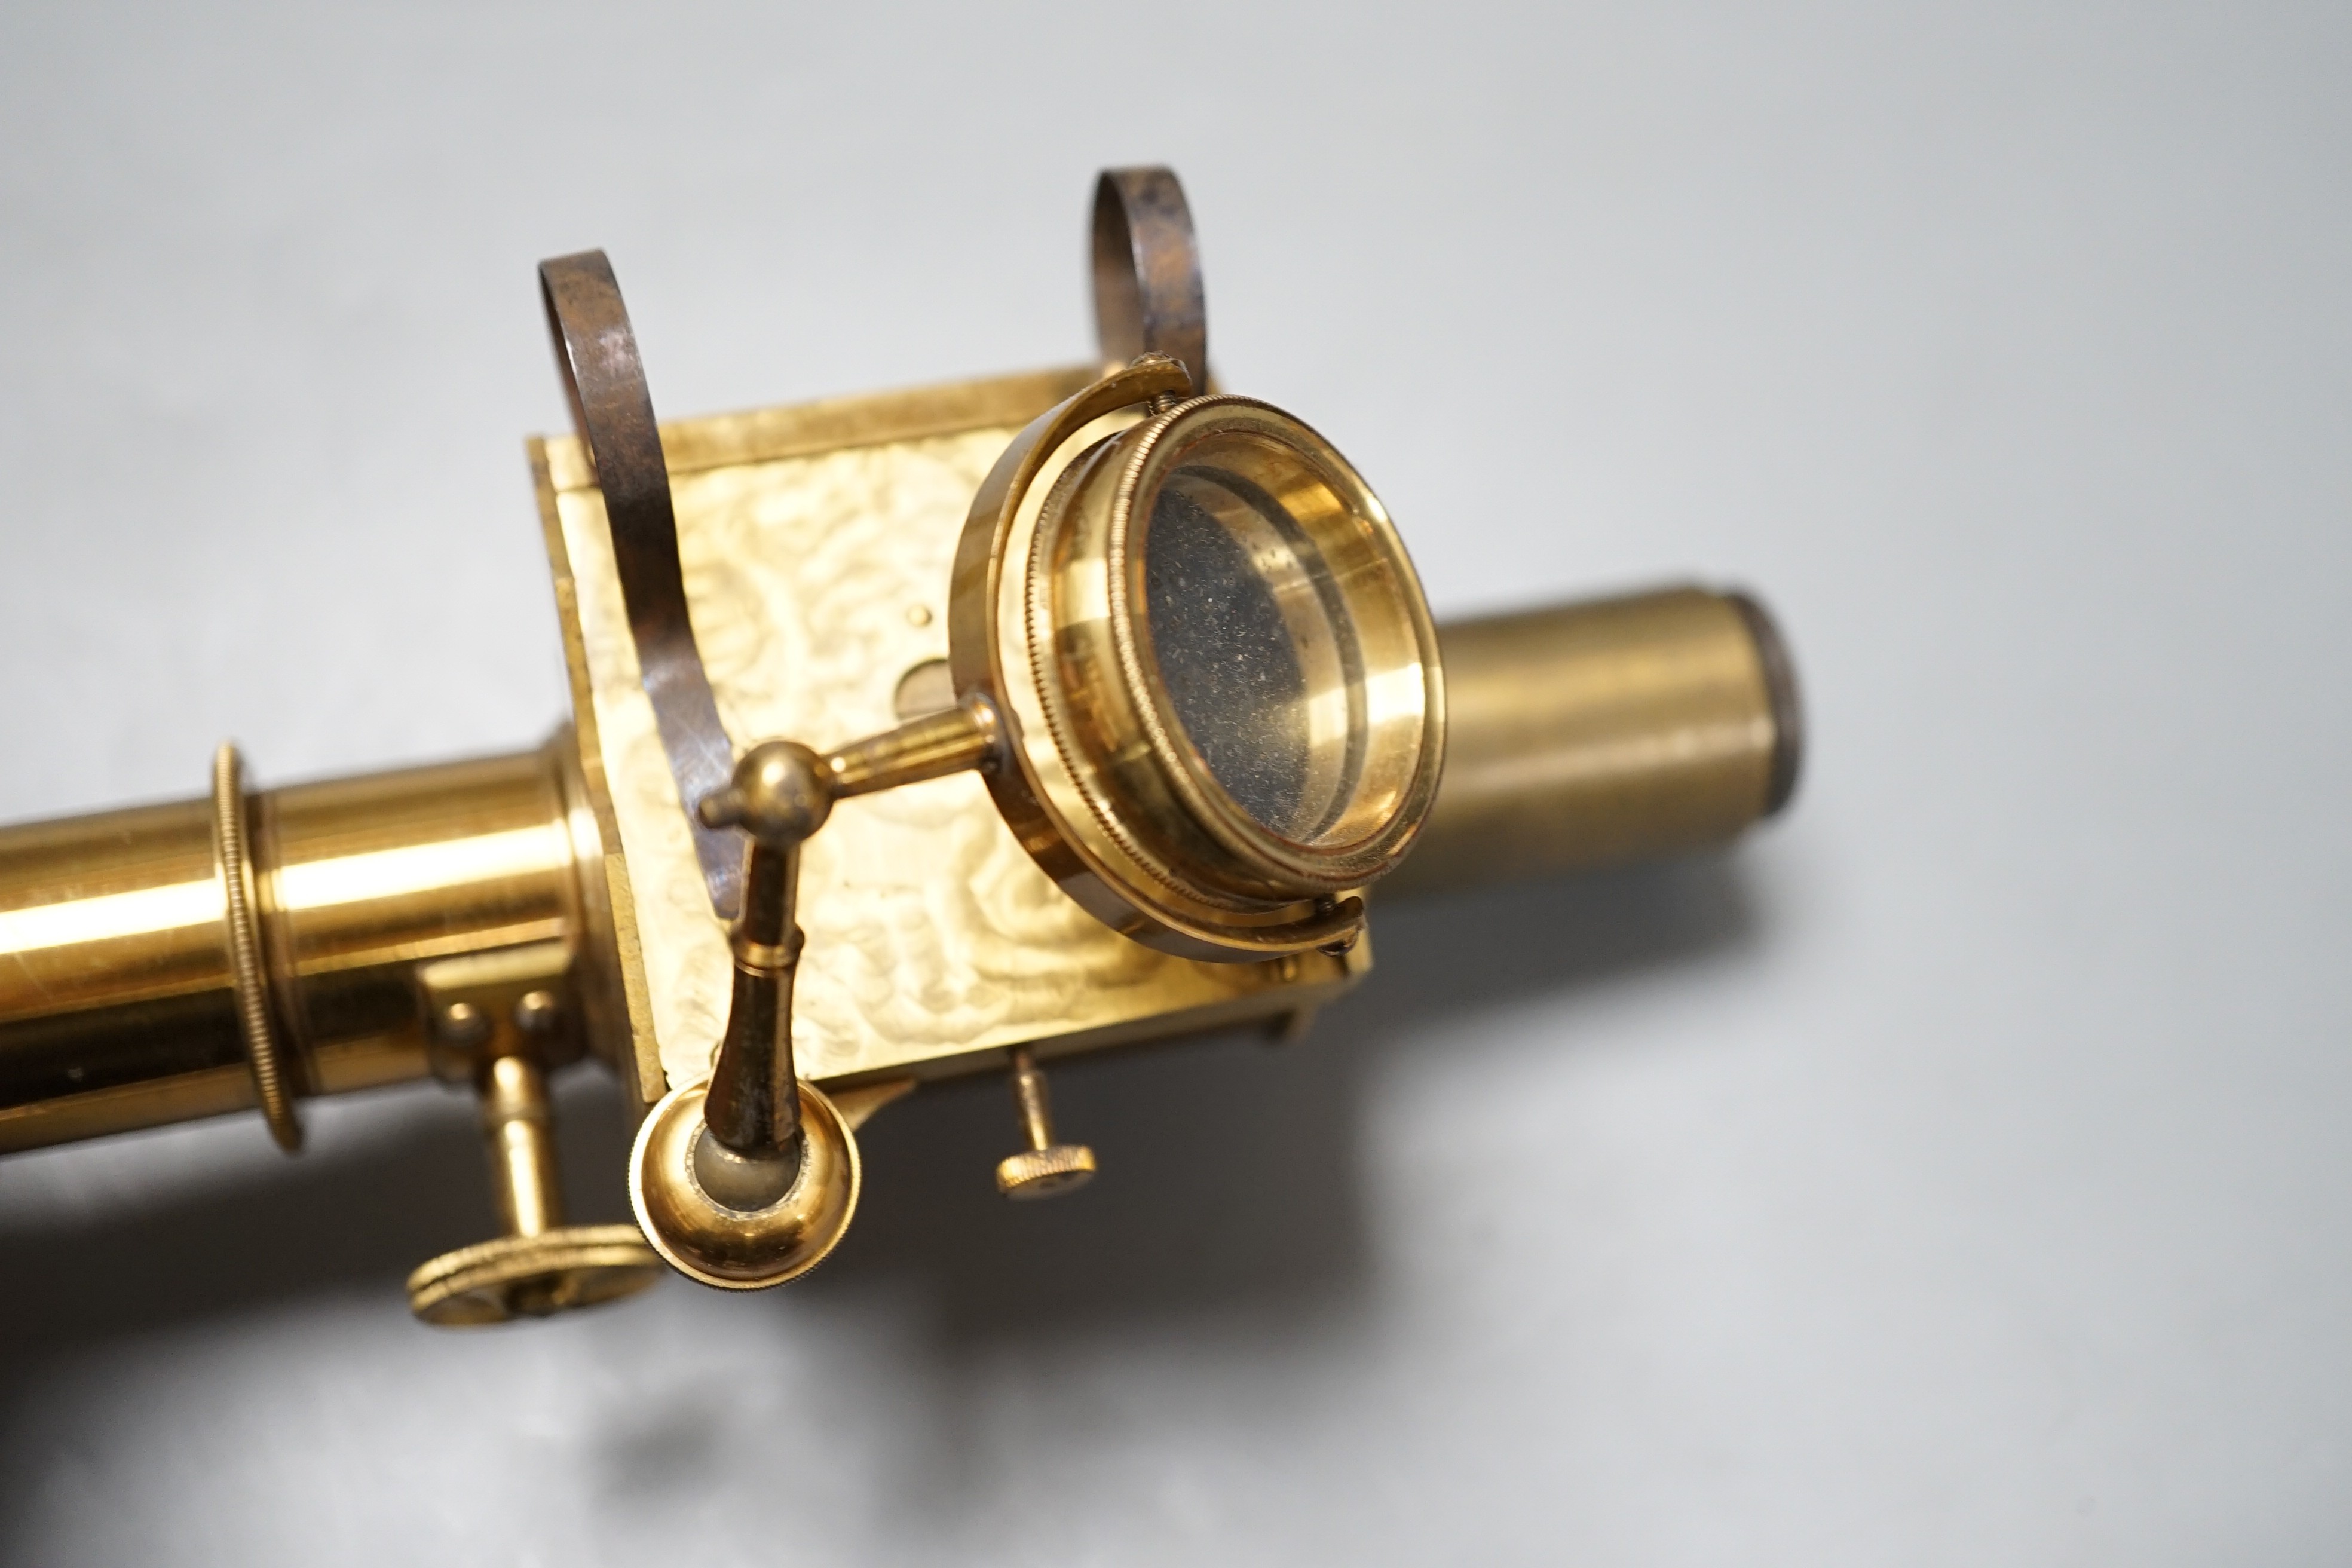 A cased John Browning lacquered brass Sorby-Browning Microspectroscope